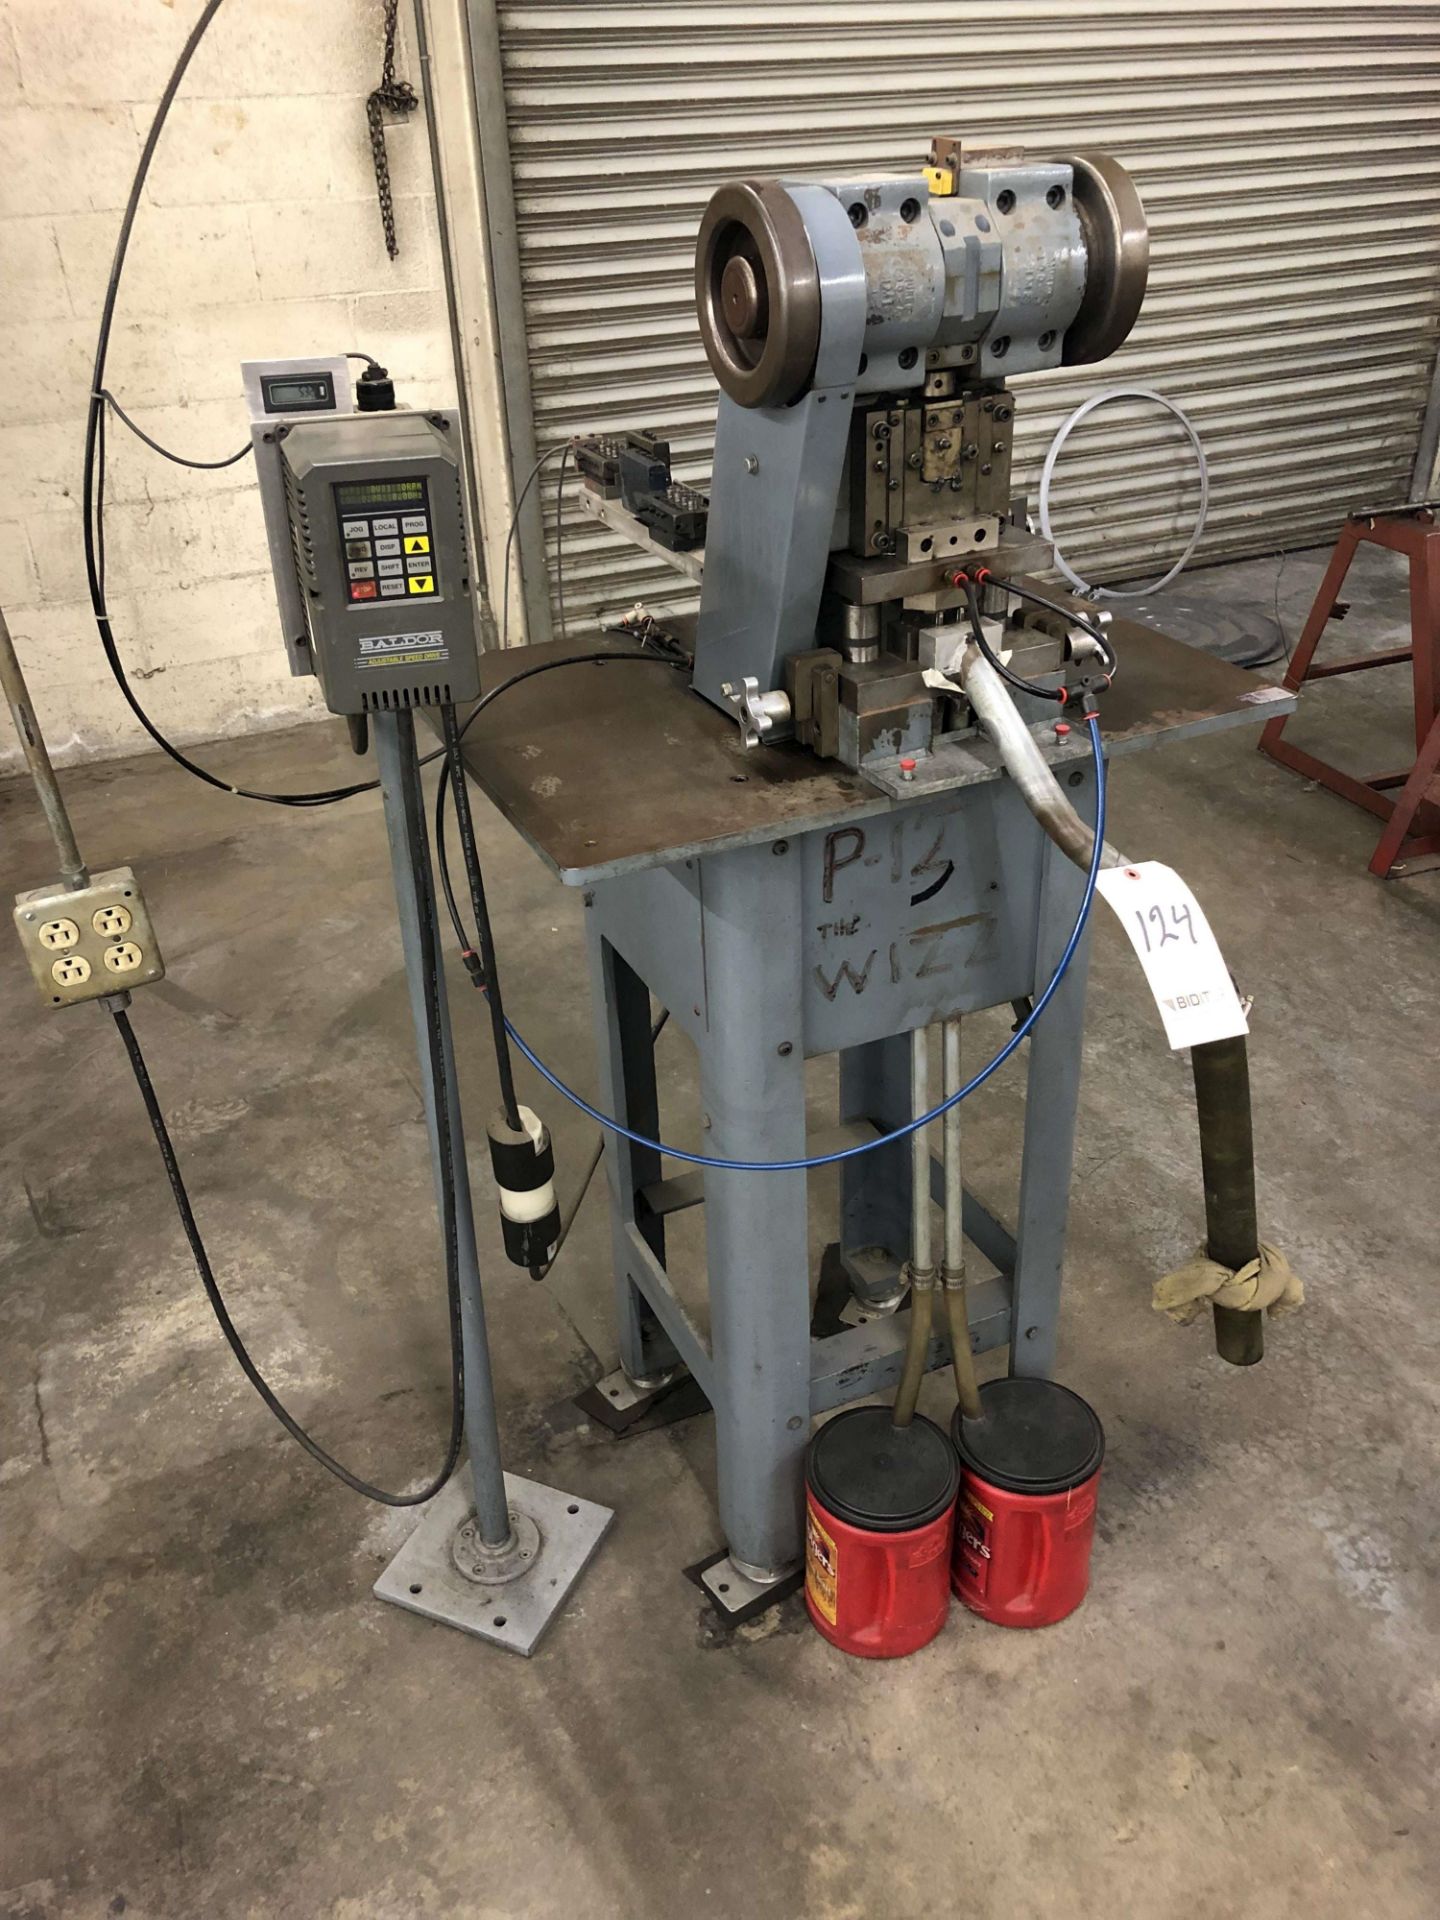 Murko Press, Model HD-95, S/N 002, Baldor Adjustable Speed Drive (Was Being Used For Making Pins)